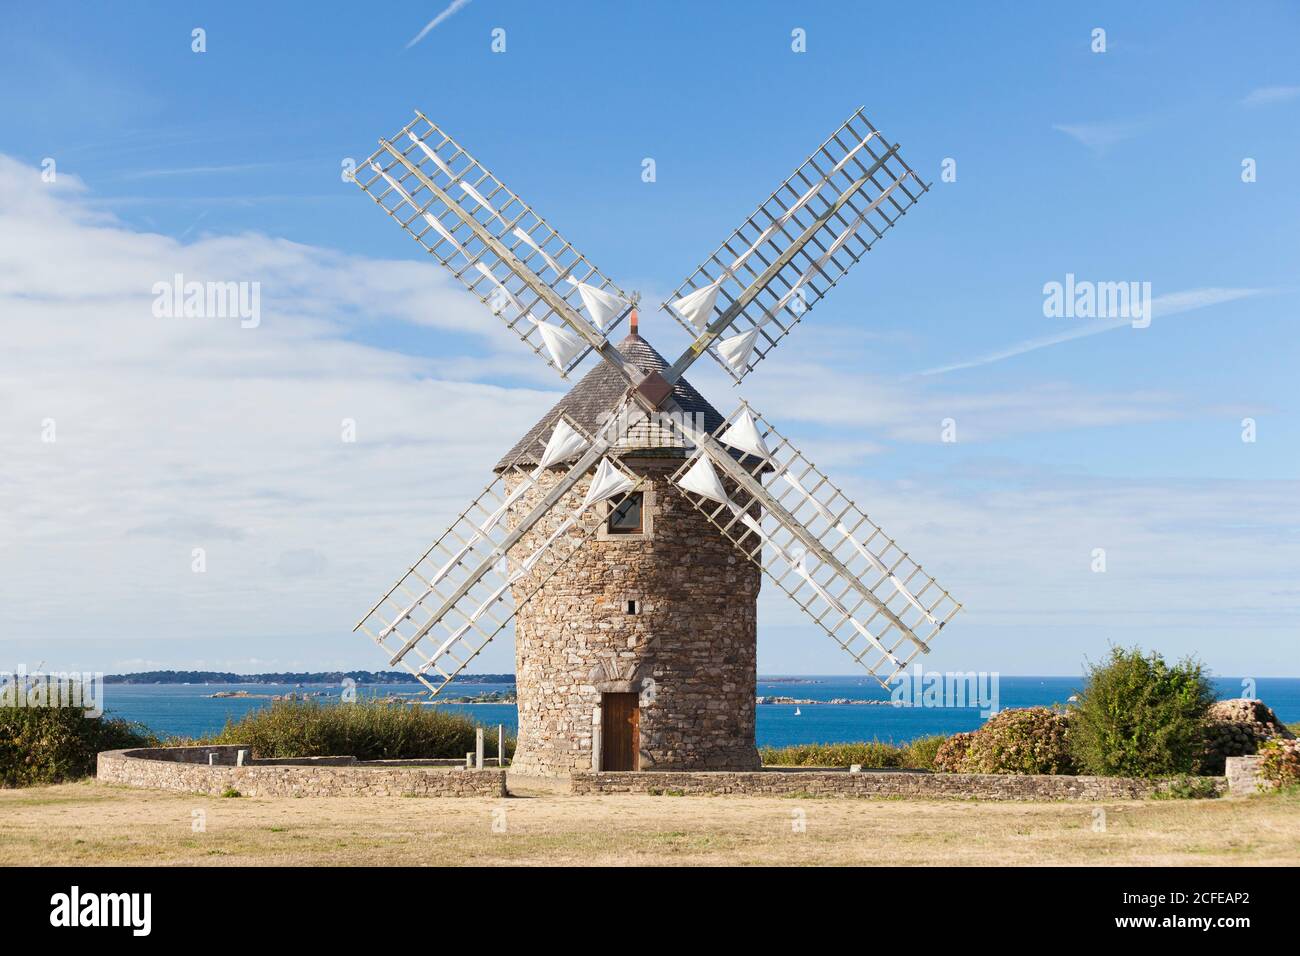 A traditional windmill on the Breton coast not far from the port city of Paimpol. From there you can see the island of Brehat. Stock Photo